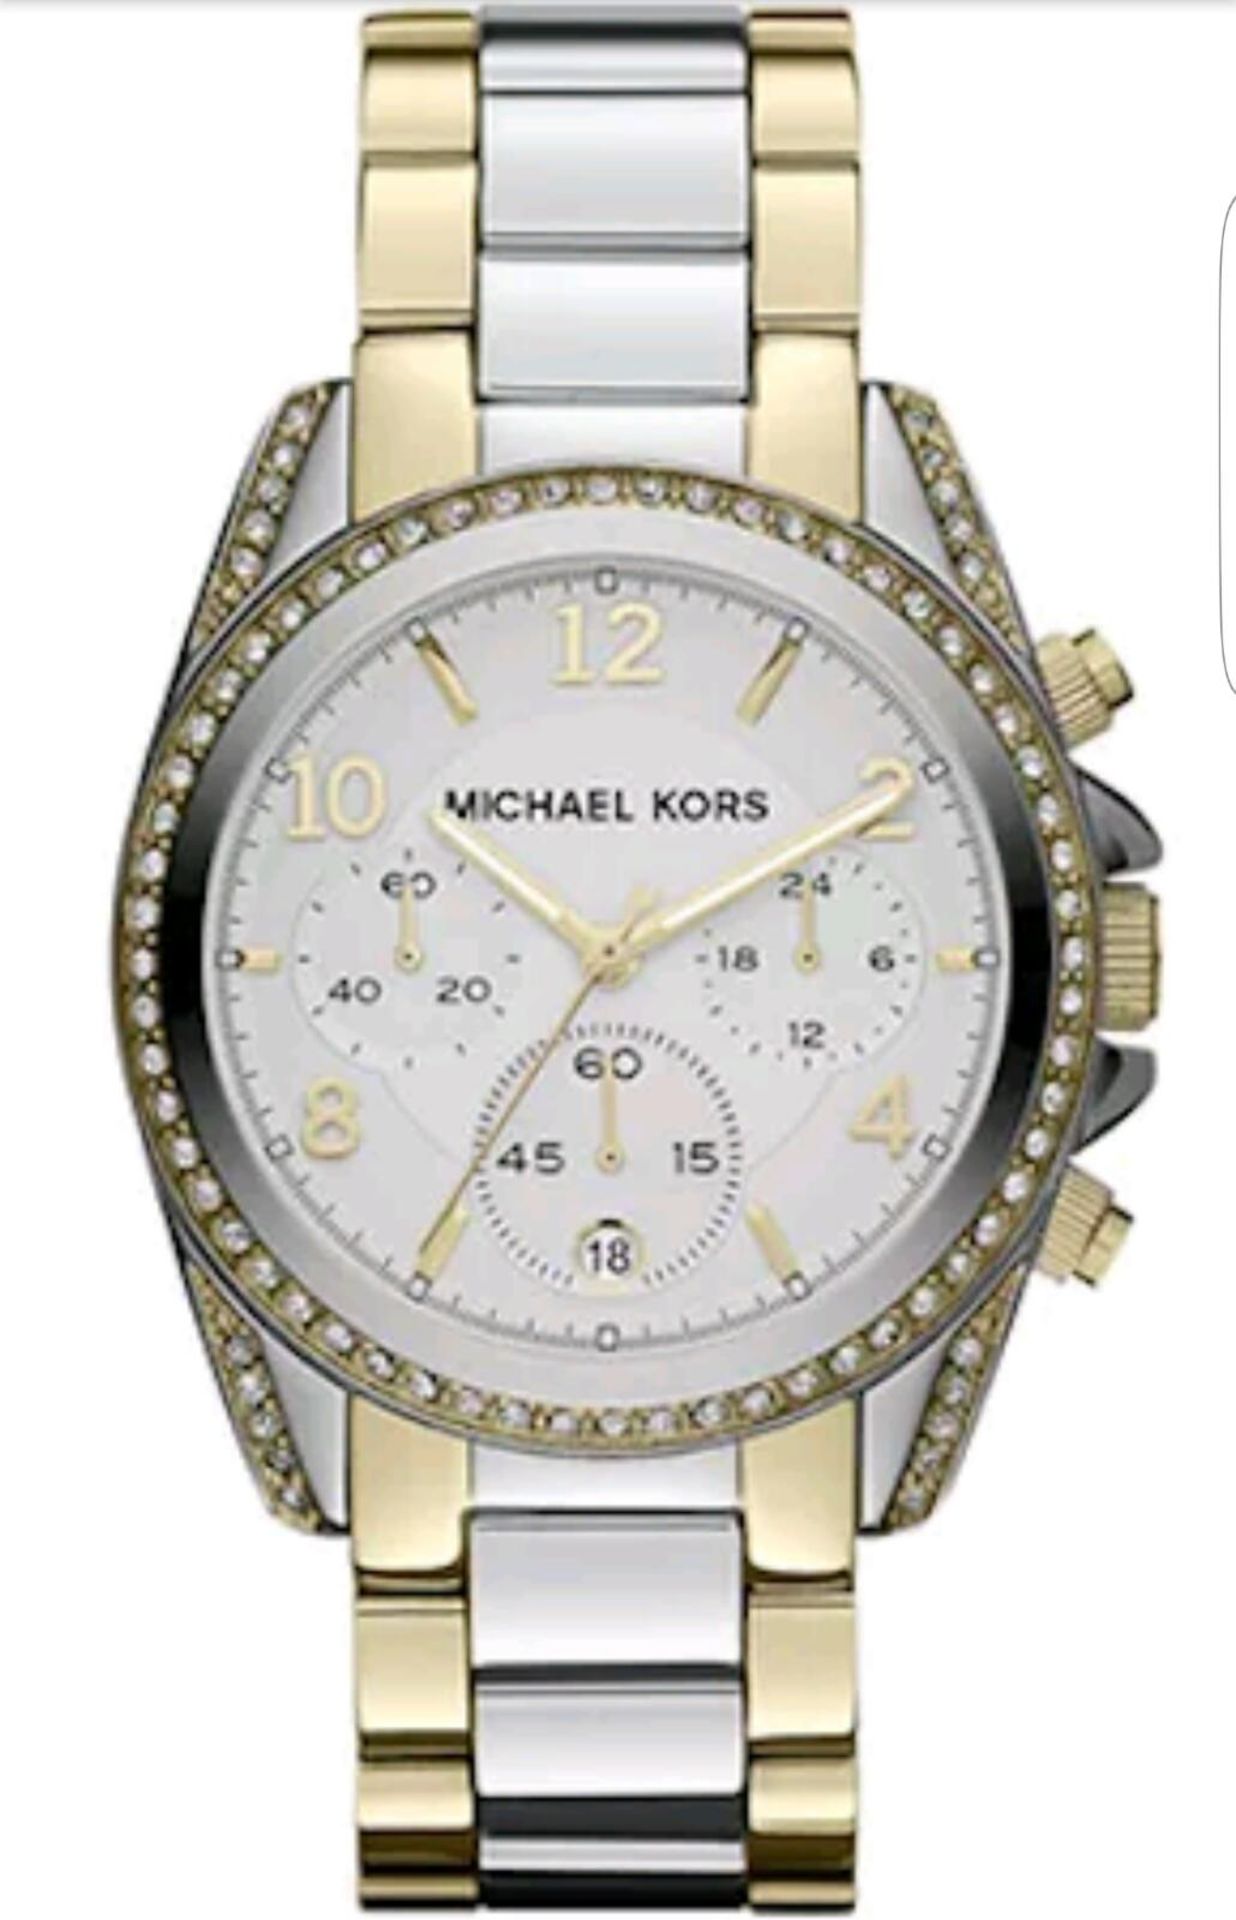 BRAND NEW LADIES MICHAEL KORS WATCH MK5685, COMPLETE WITH ORIGINAL BOX AND MANUAL - FREE P & P